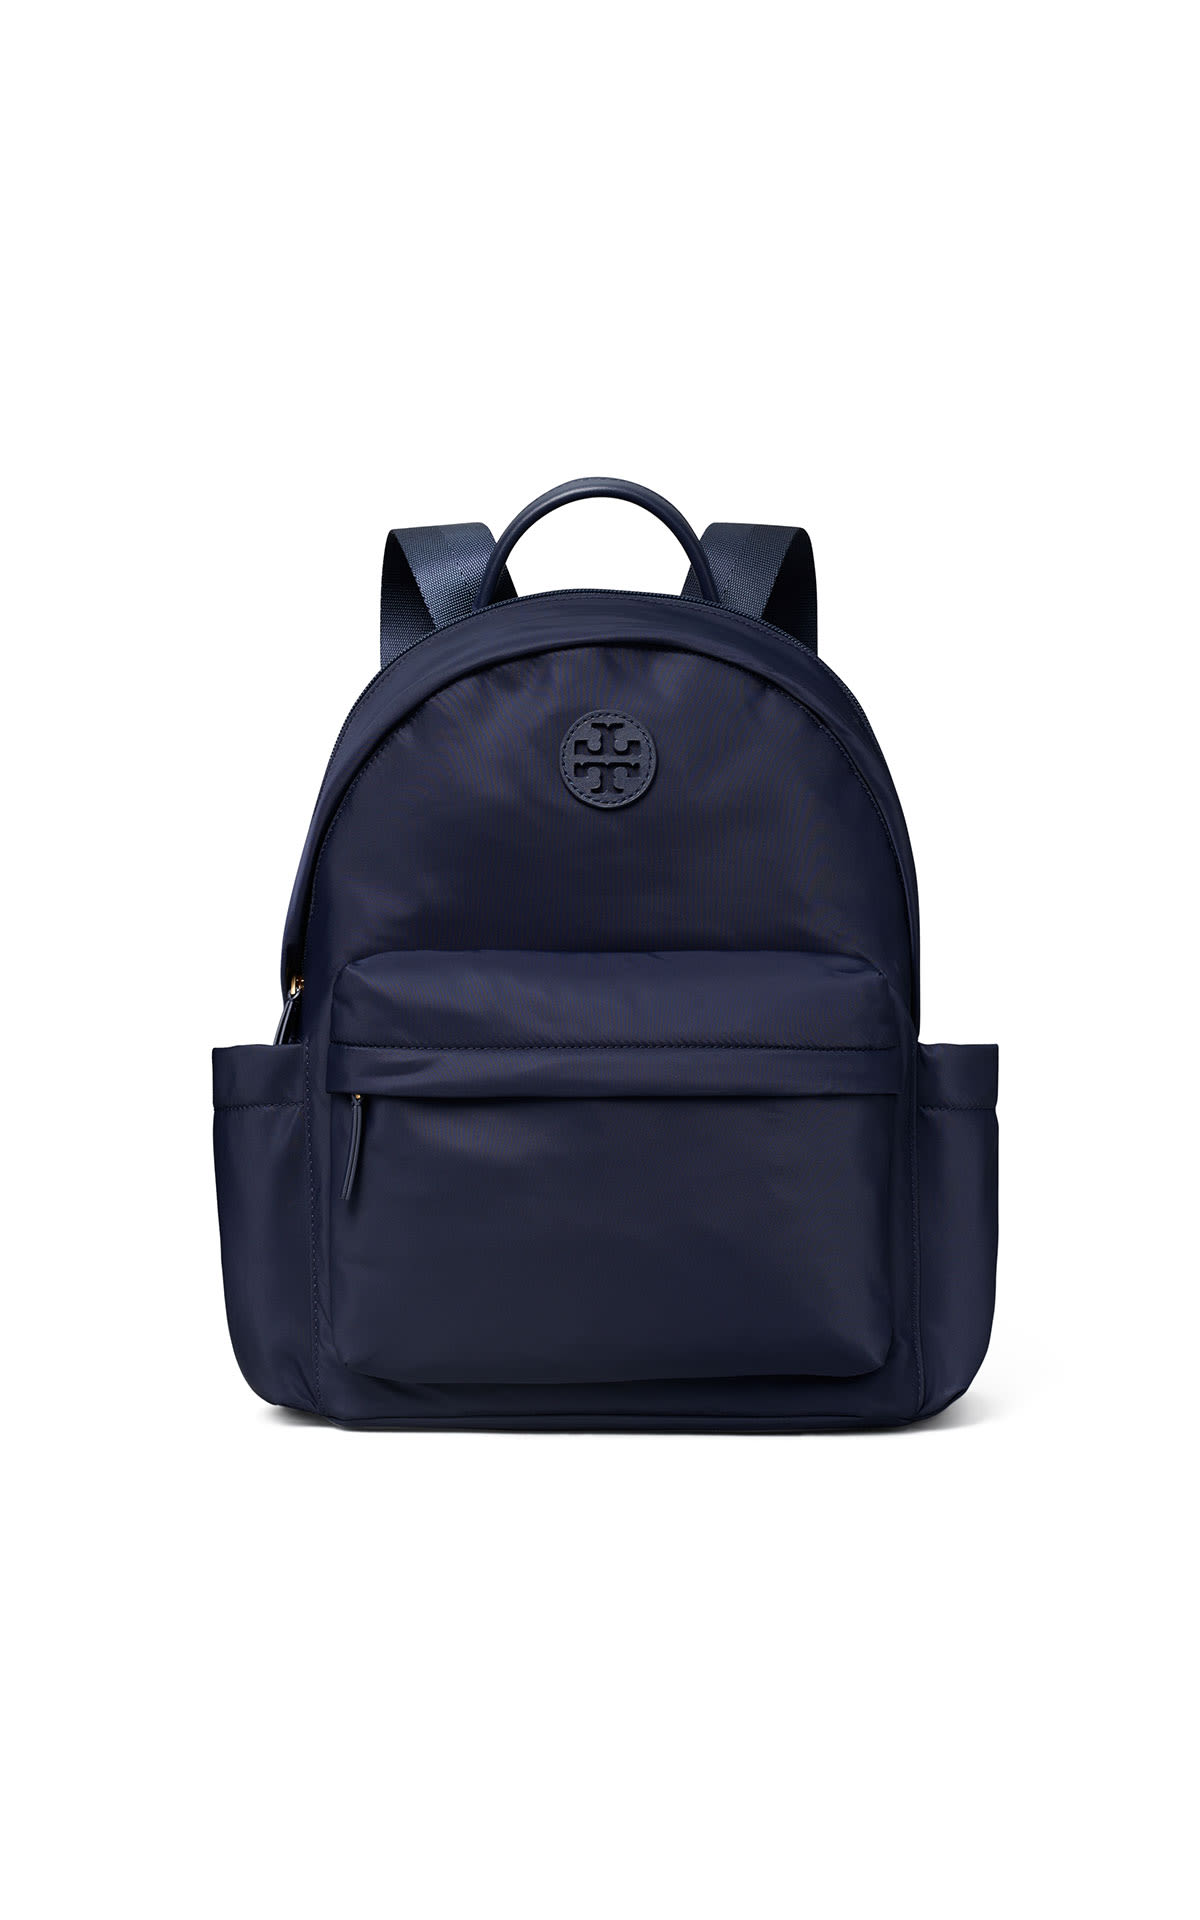 Tory Burch Ella nylon backpack from Bicester Village